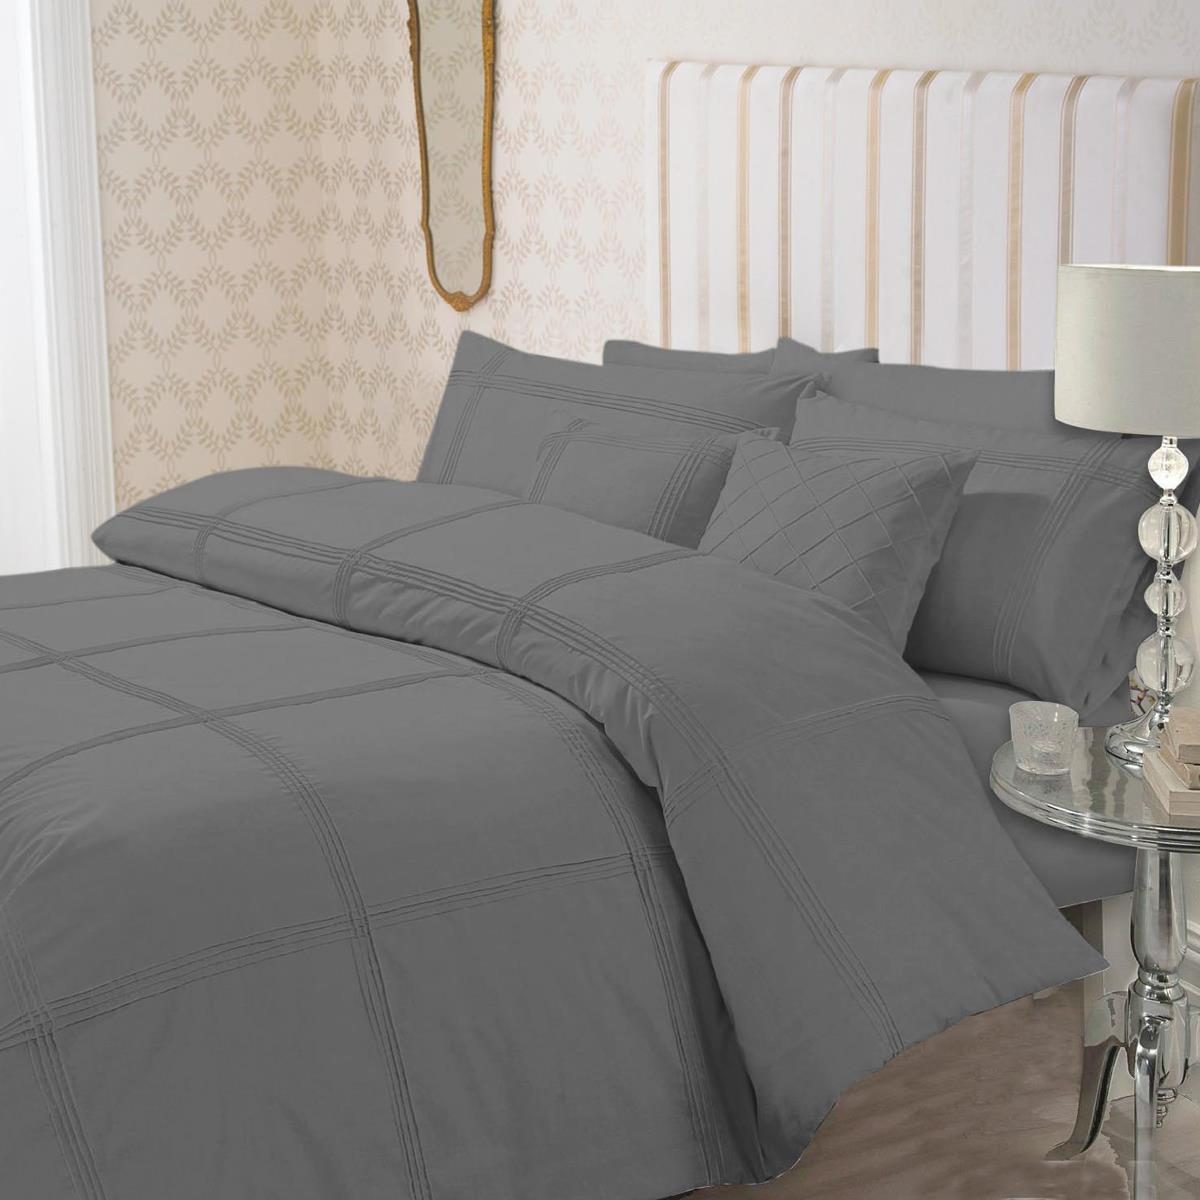 8-Pcs-Dyed-Pleated-Grey-Bed-Sheet-Set-with-Quilt-Pillow-and-Cushions-Covers.jpg